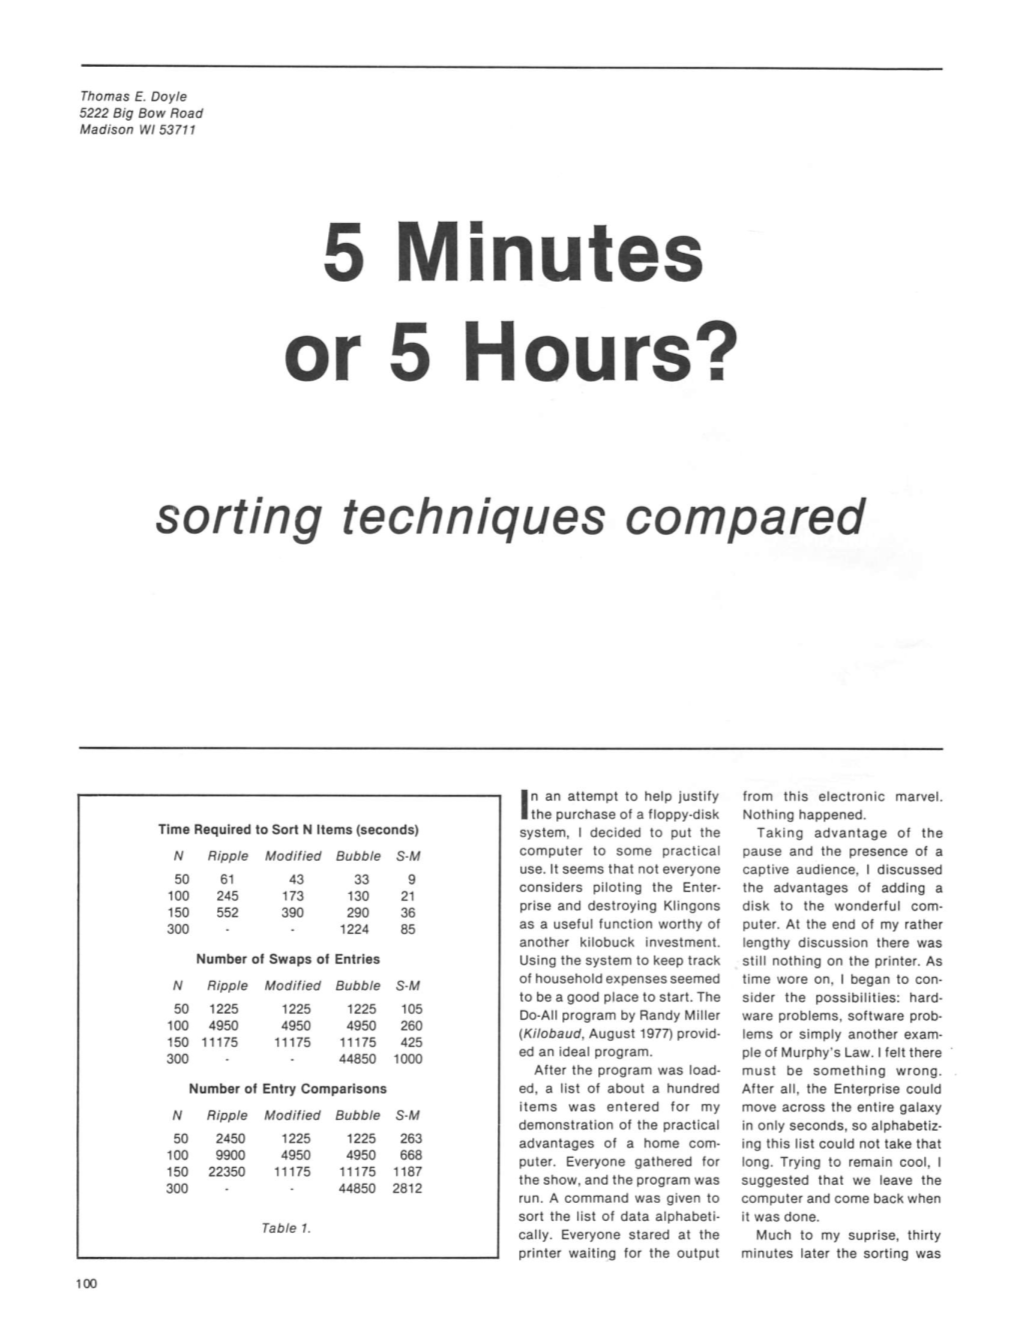 5 Minutes Or 5 Hours?